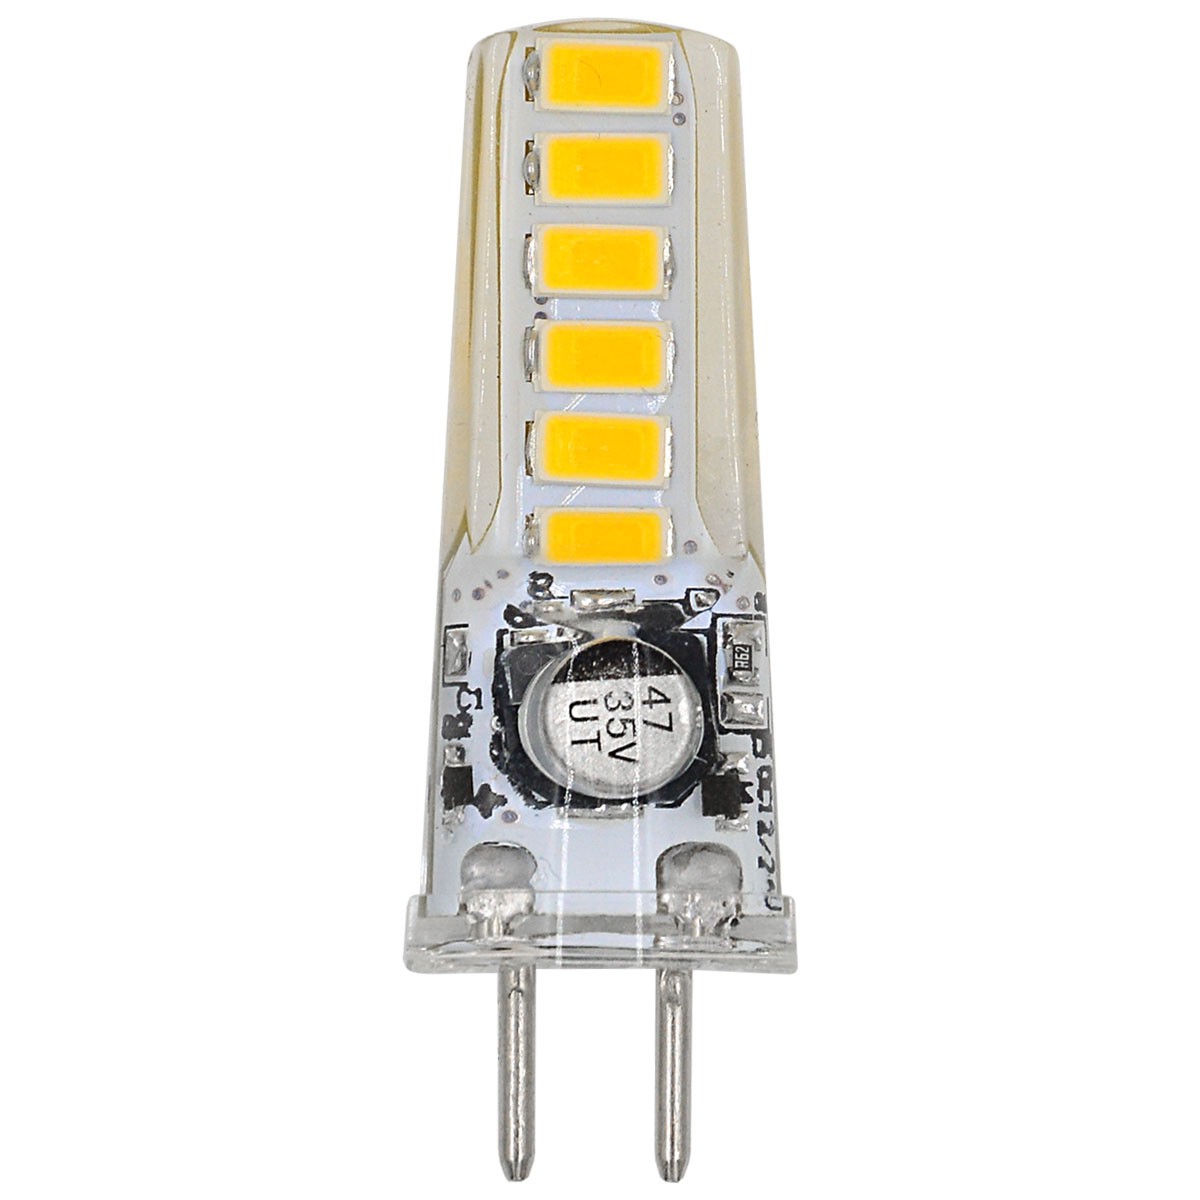 Mengsled Mengs® Gy635 3w Led Light 12x 5730 Smd Led Bulb Lamp Acdc